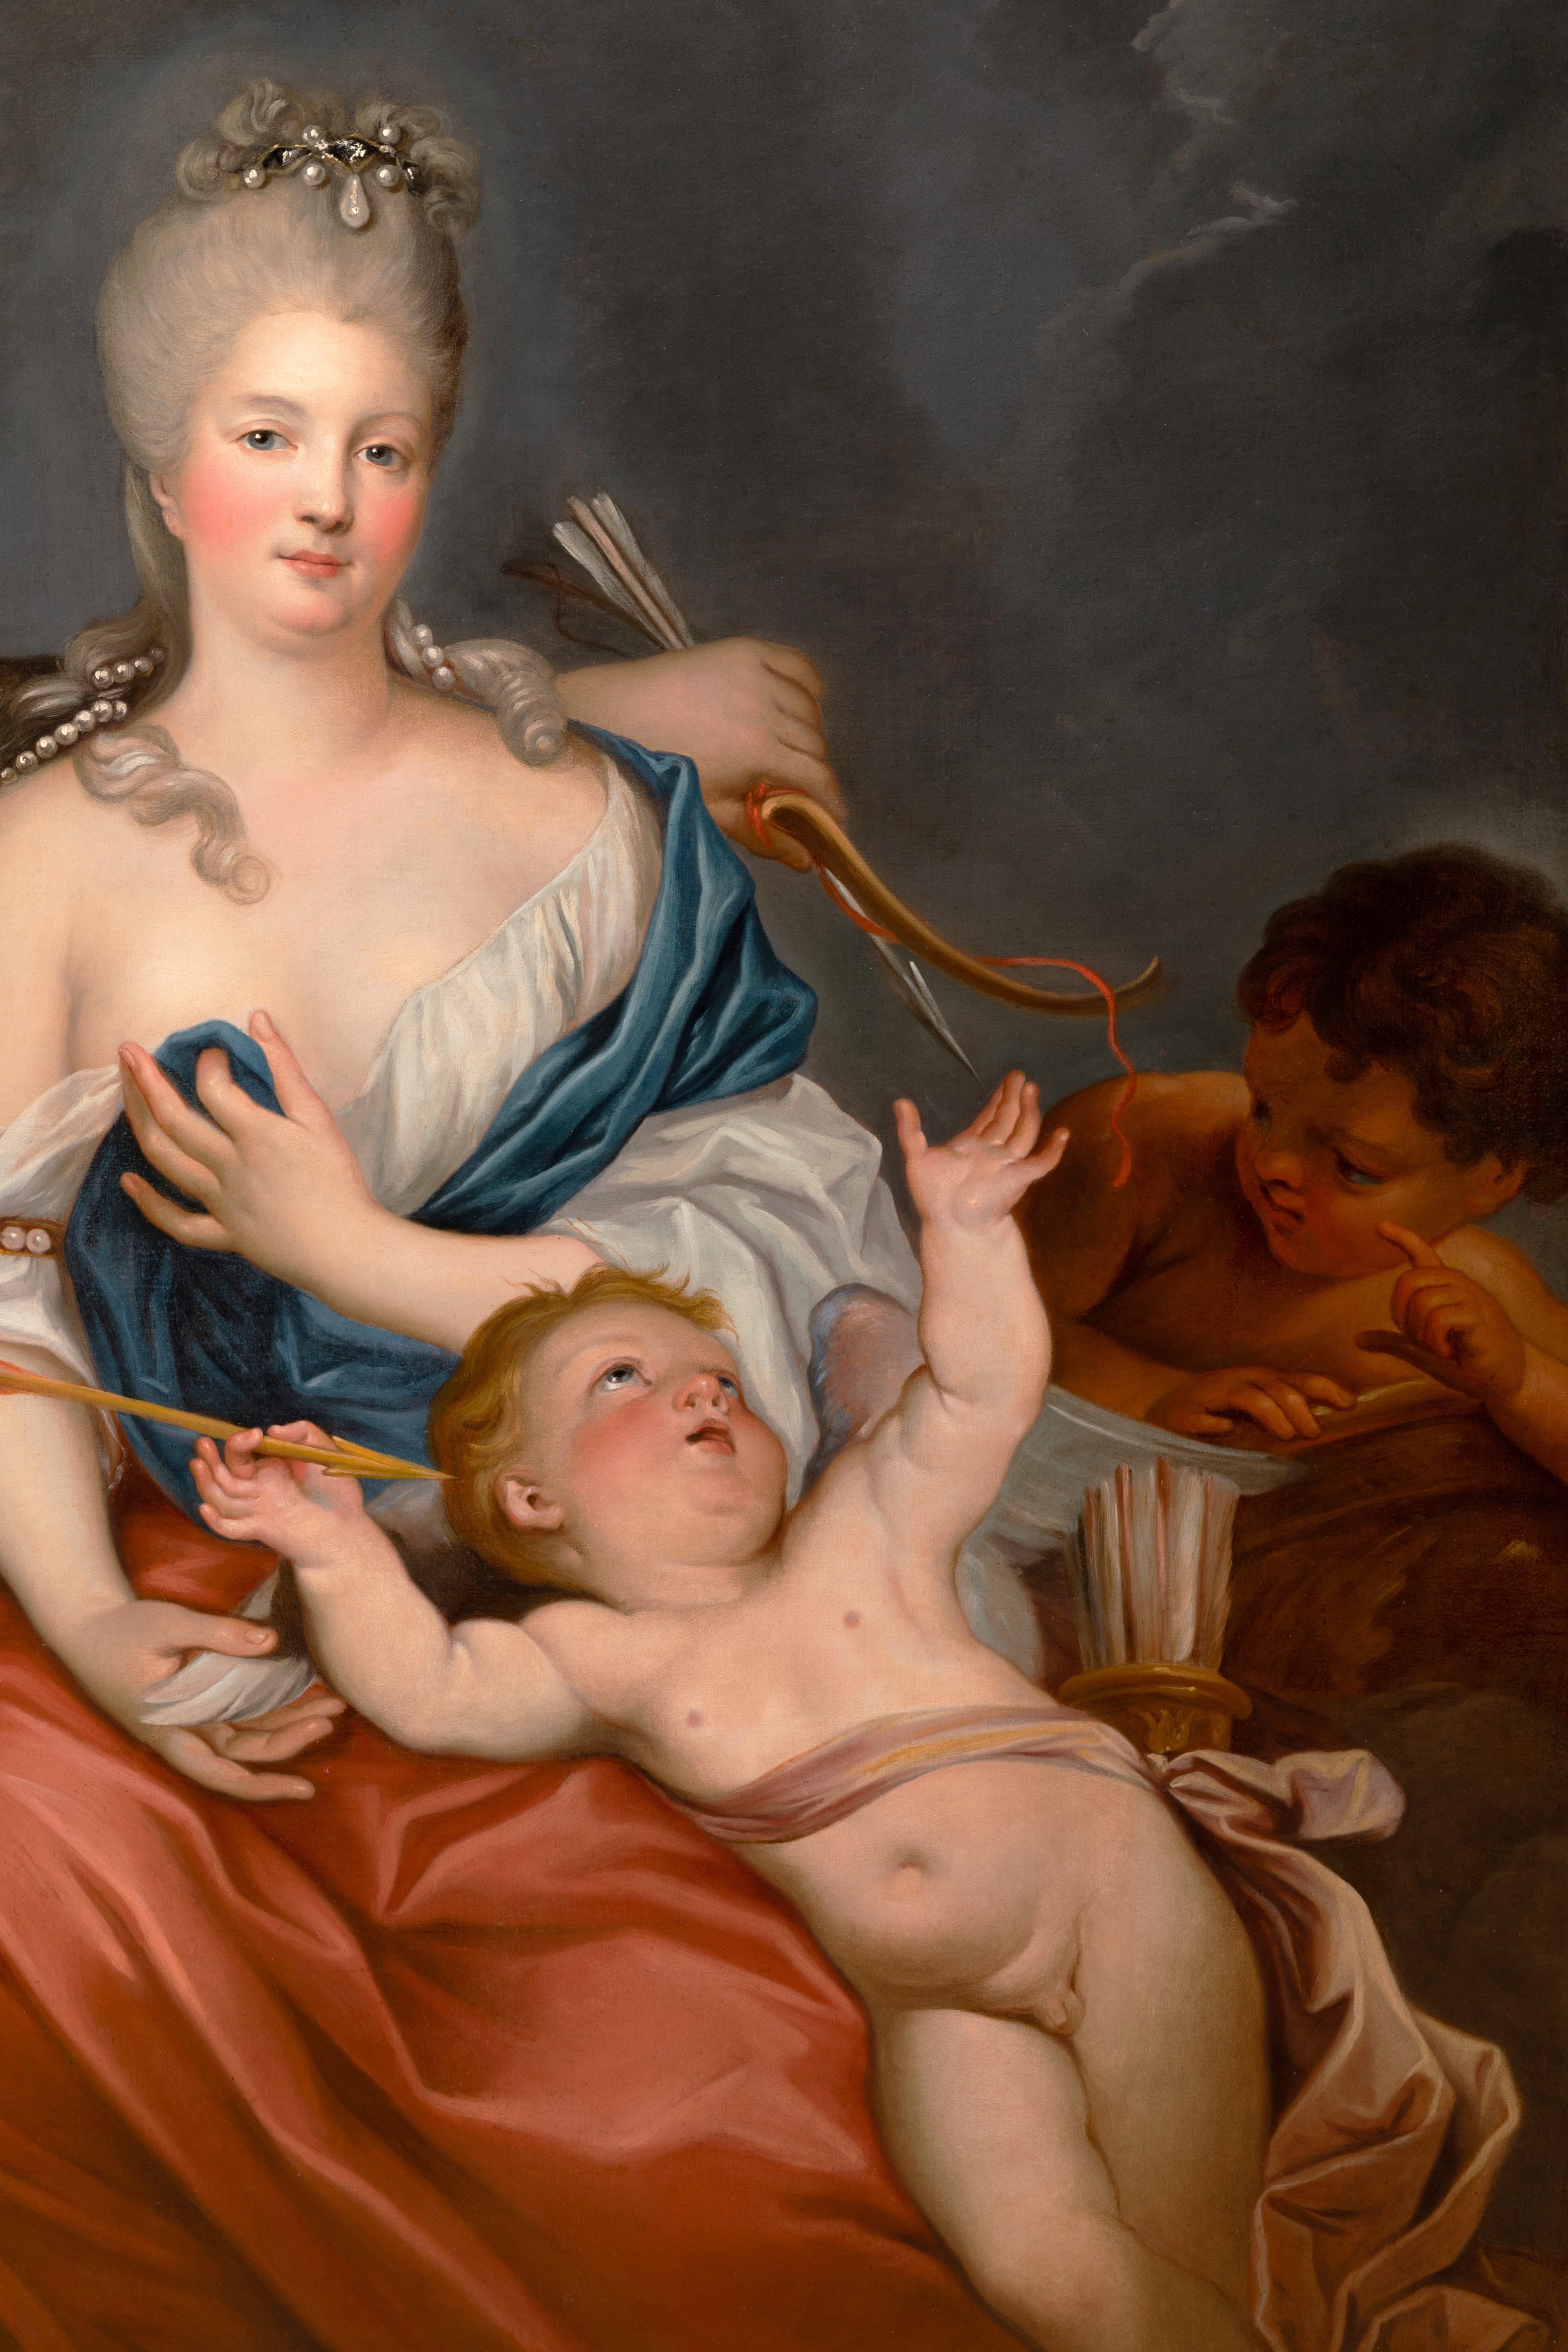 Portrait of a lady as Venus disarming Cupid,
circle of Charles Andre Van Loo (1706-1765)
18th century French school
Large and imposing allegorical portrait of a younglady depicted as Venus surrounded by servants and cherubs.
Staged in the heavens,